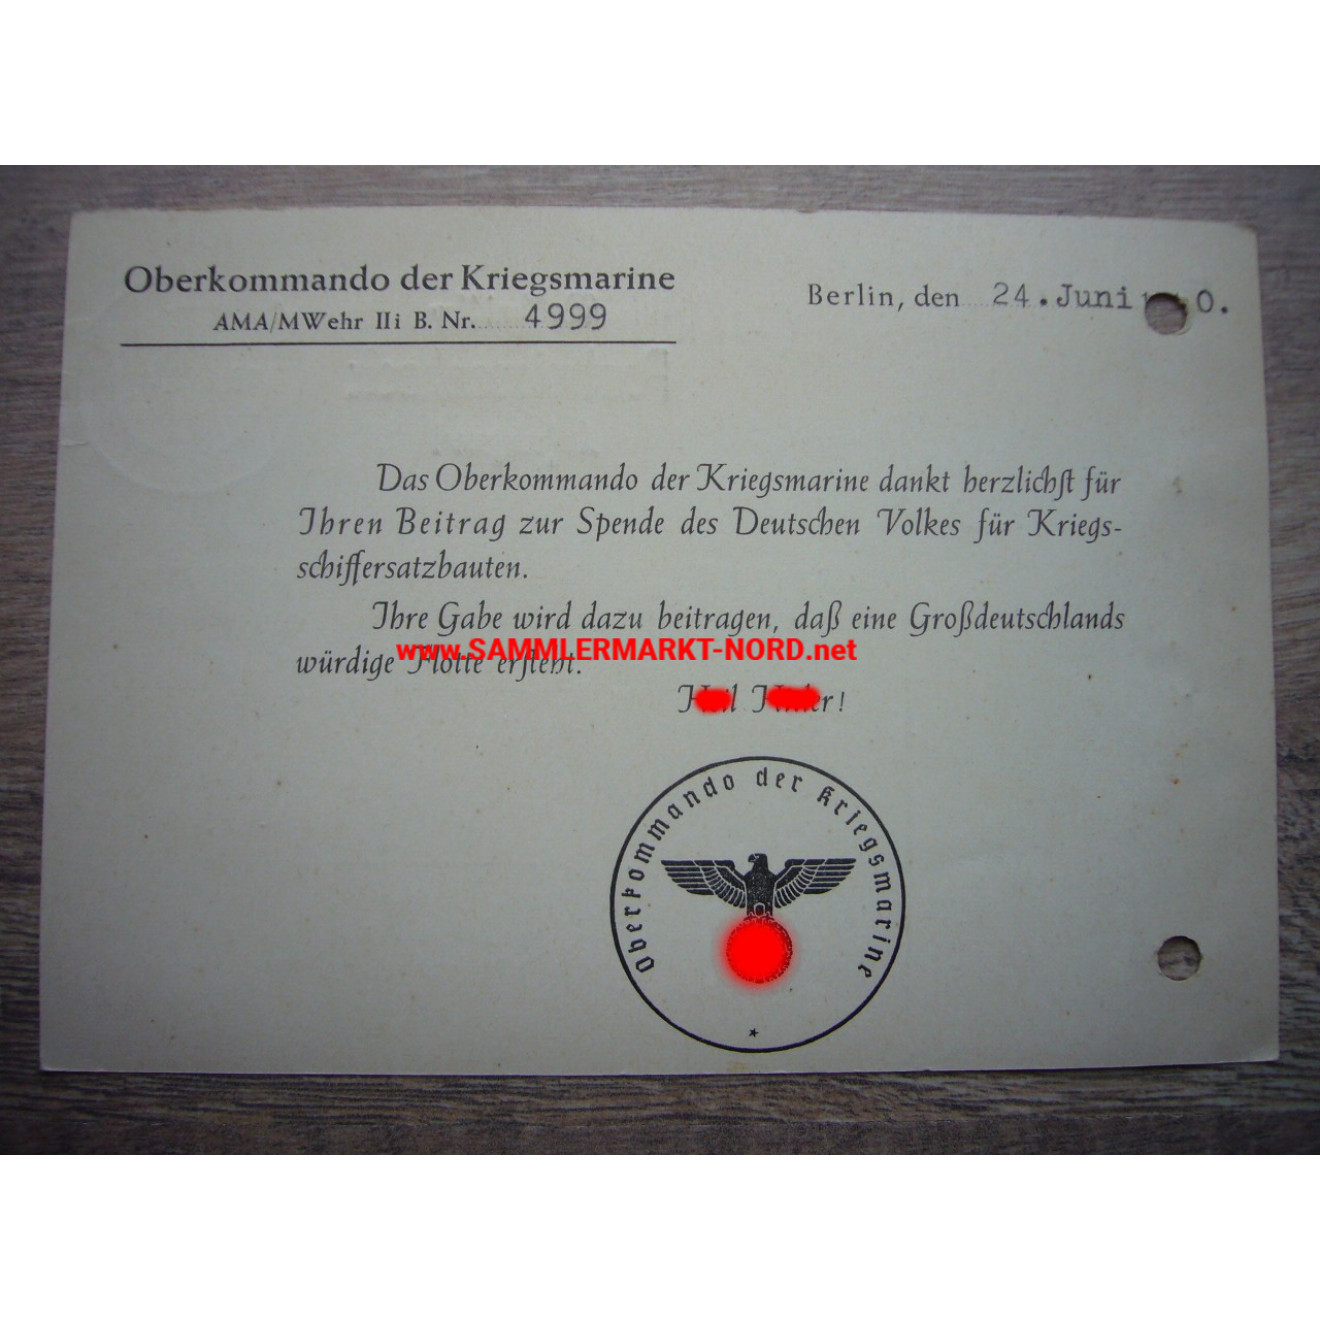 High Command of the German Navy - Acknowledgement for Donation for Warship Replacement Structures